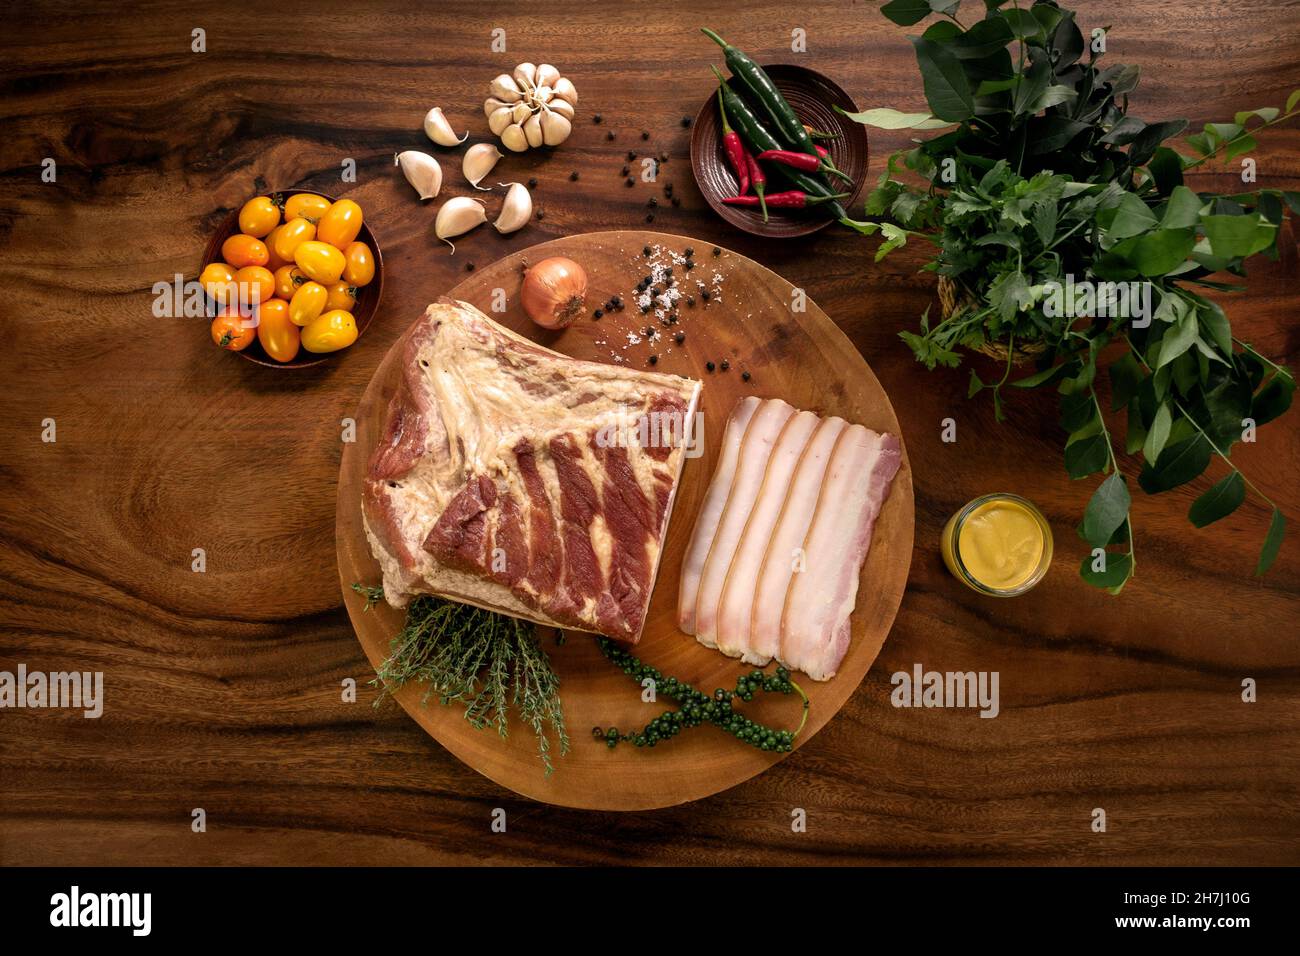 smoked fatty bacon on rustic wood table with natural ingredients arrangement Stock Photo